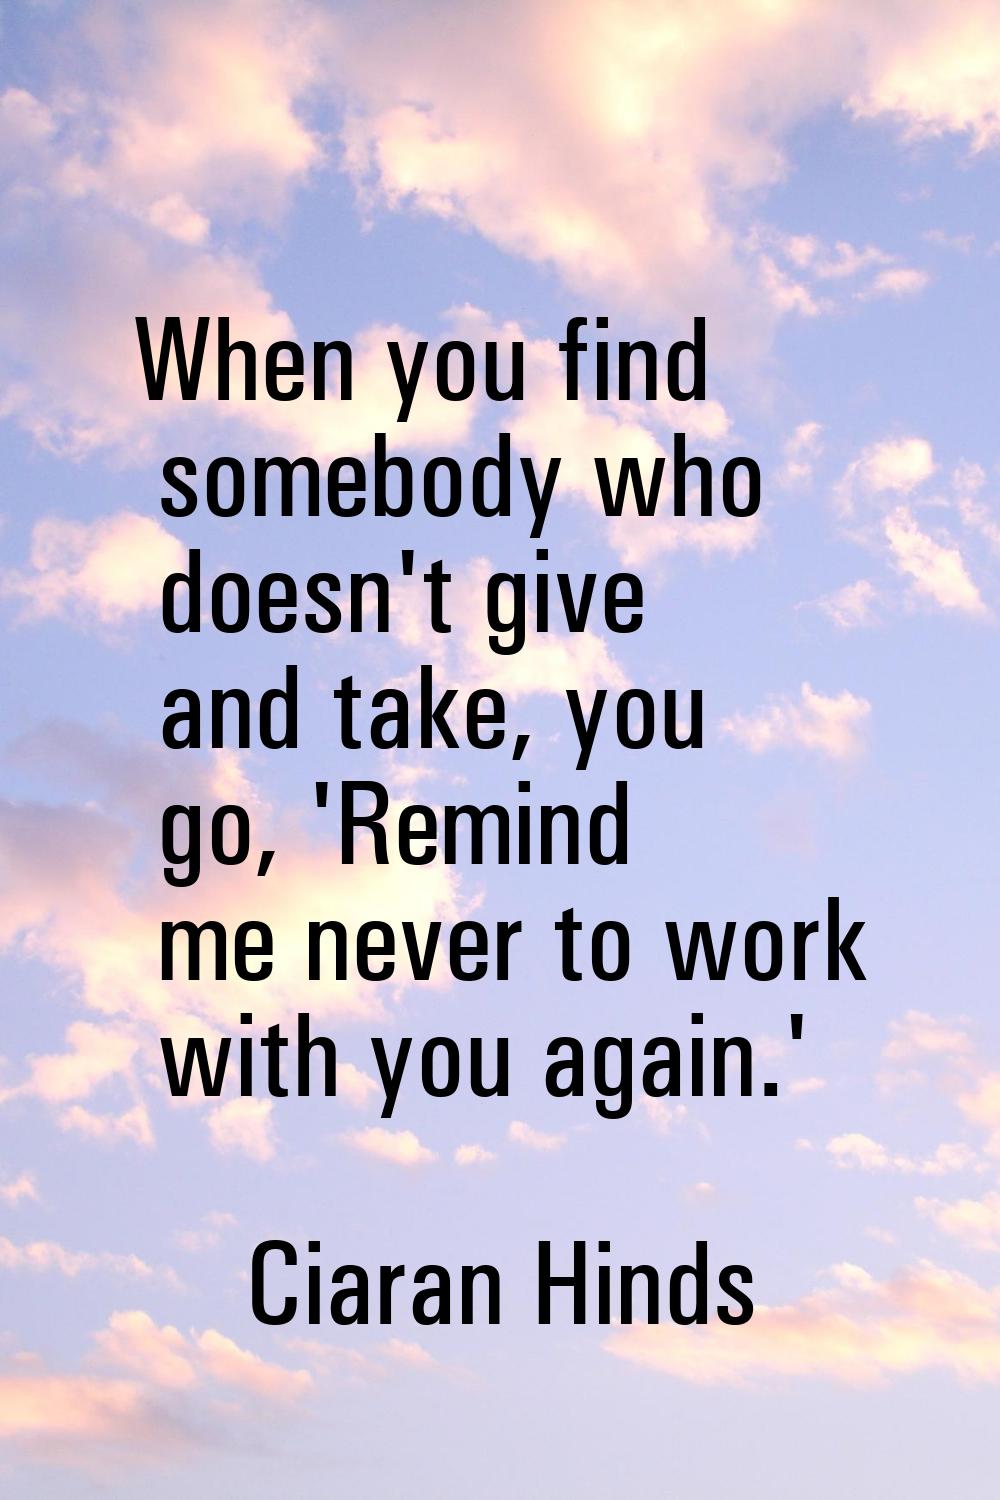 When you find somebody who doesn't give and take, you go, 'Remind me never to work with you again.'